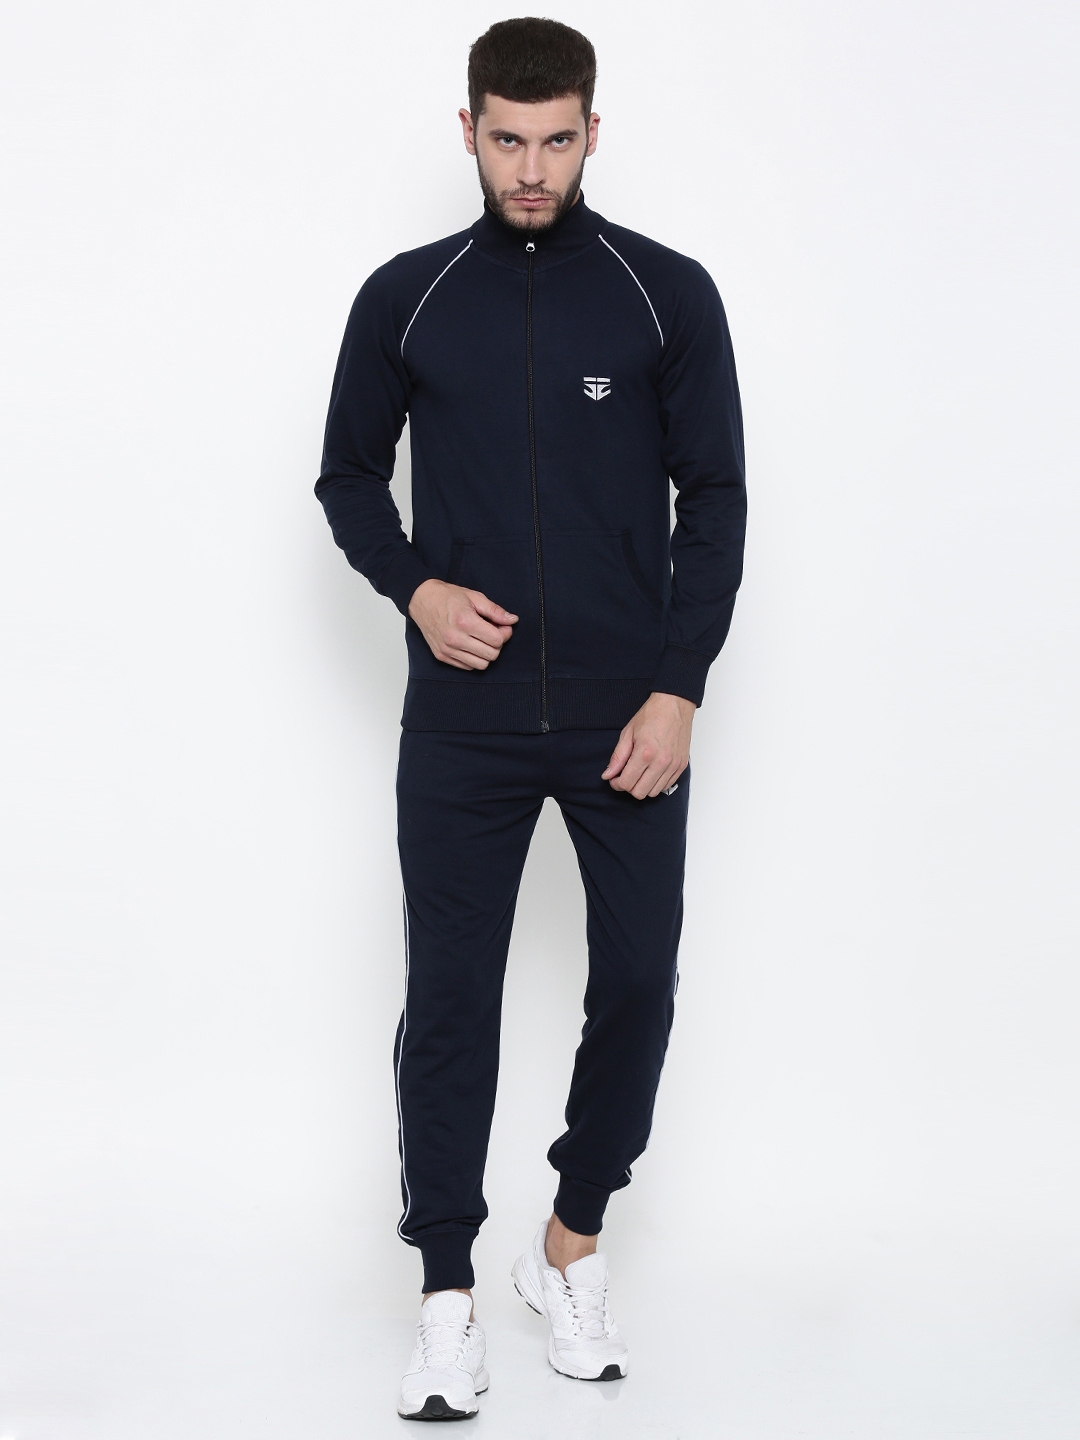 Buy FIFTY TWO Navy Tracksuit - Tracksuits for Men 1802611 | Myntra